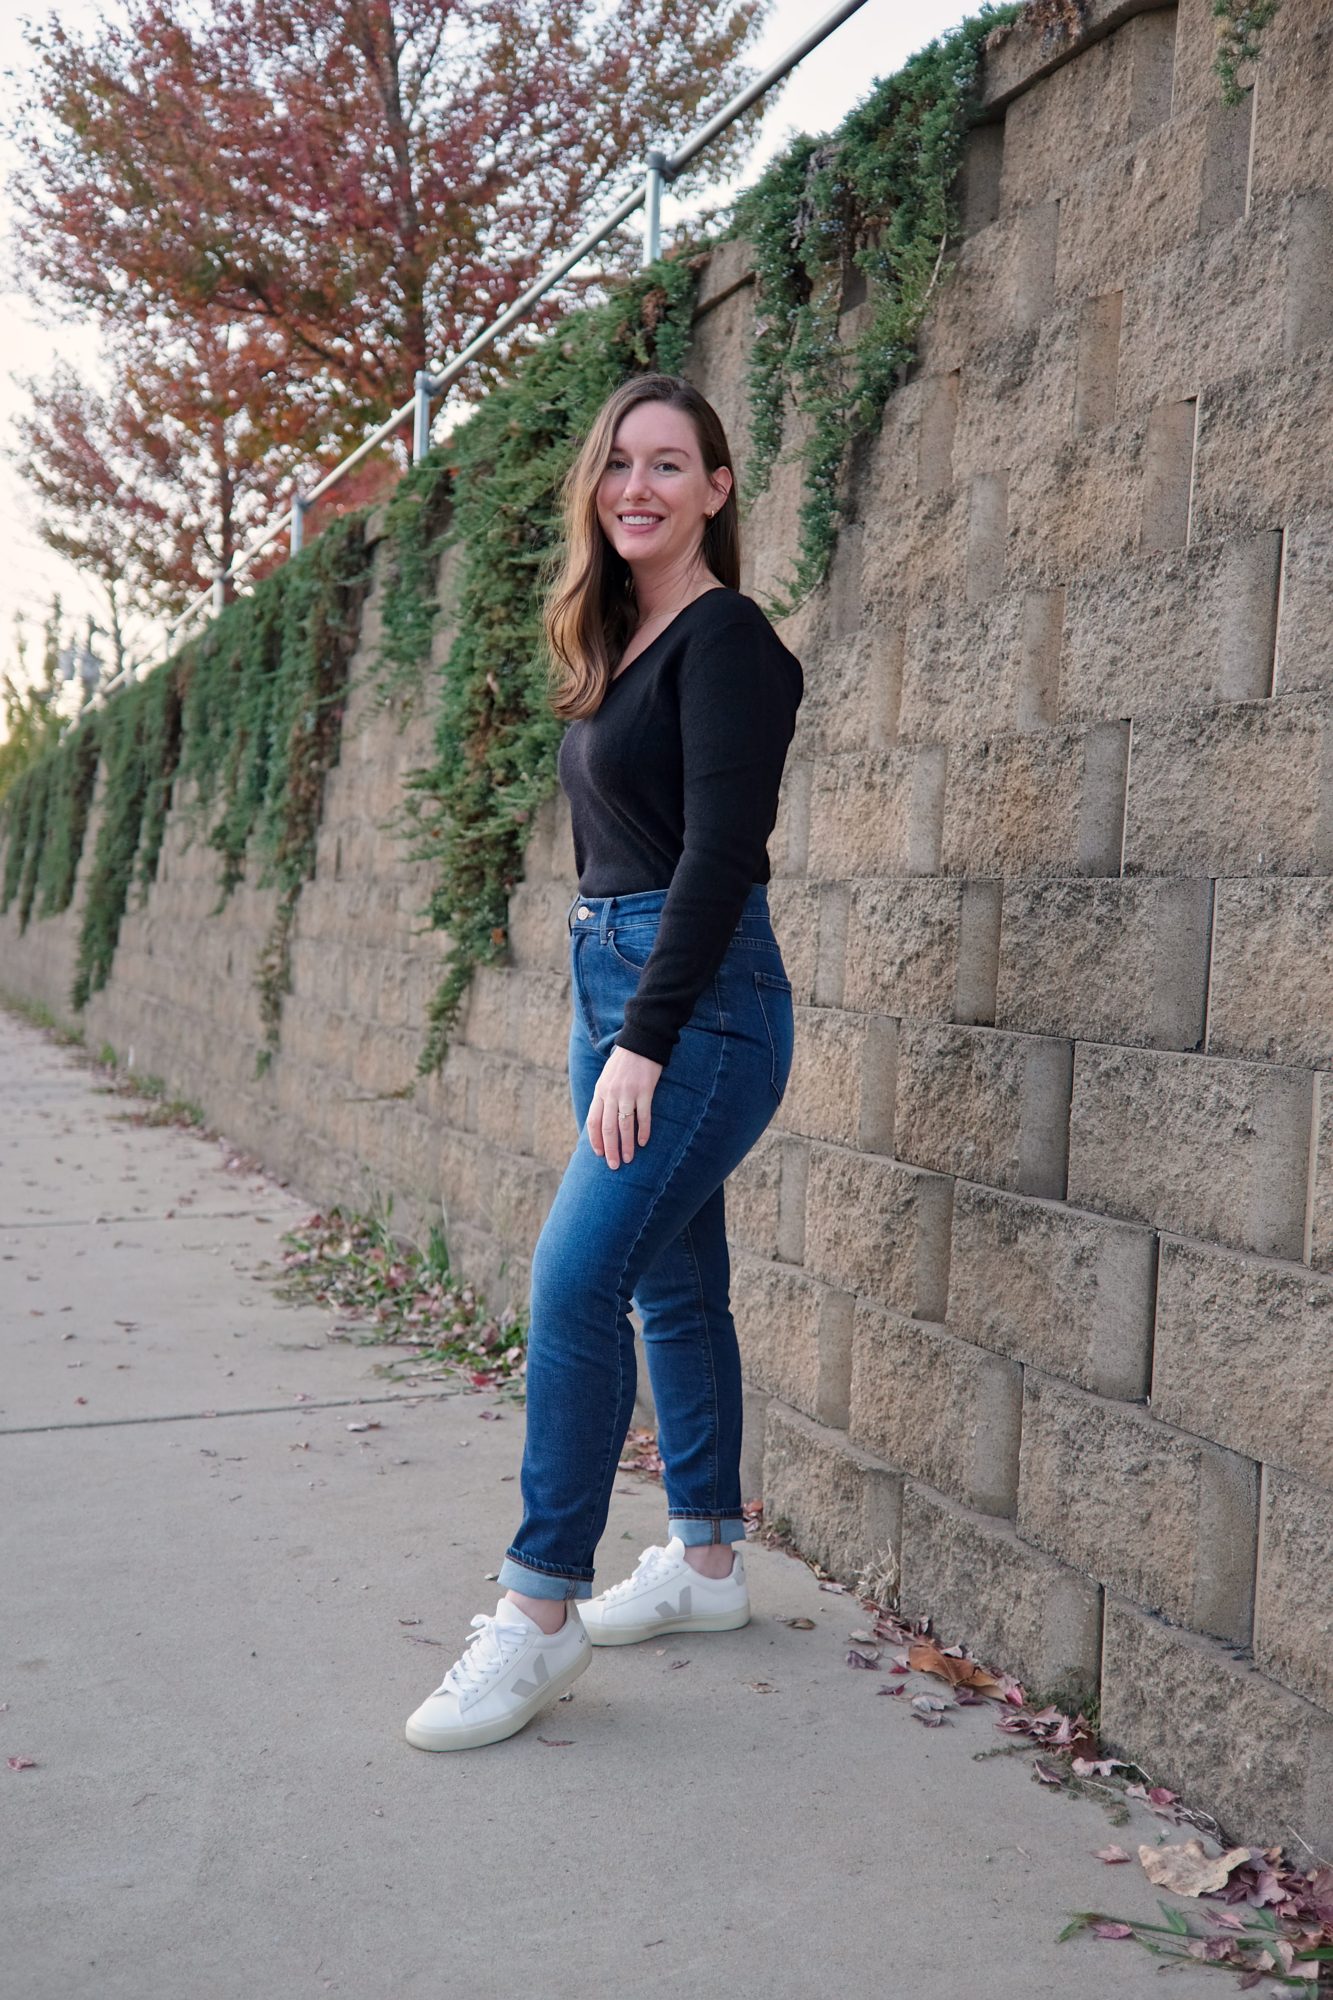 Alyssa wears a black cashmere sweater with blue jeans and white sneakers